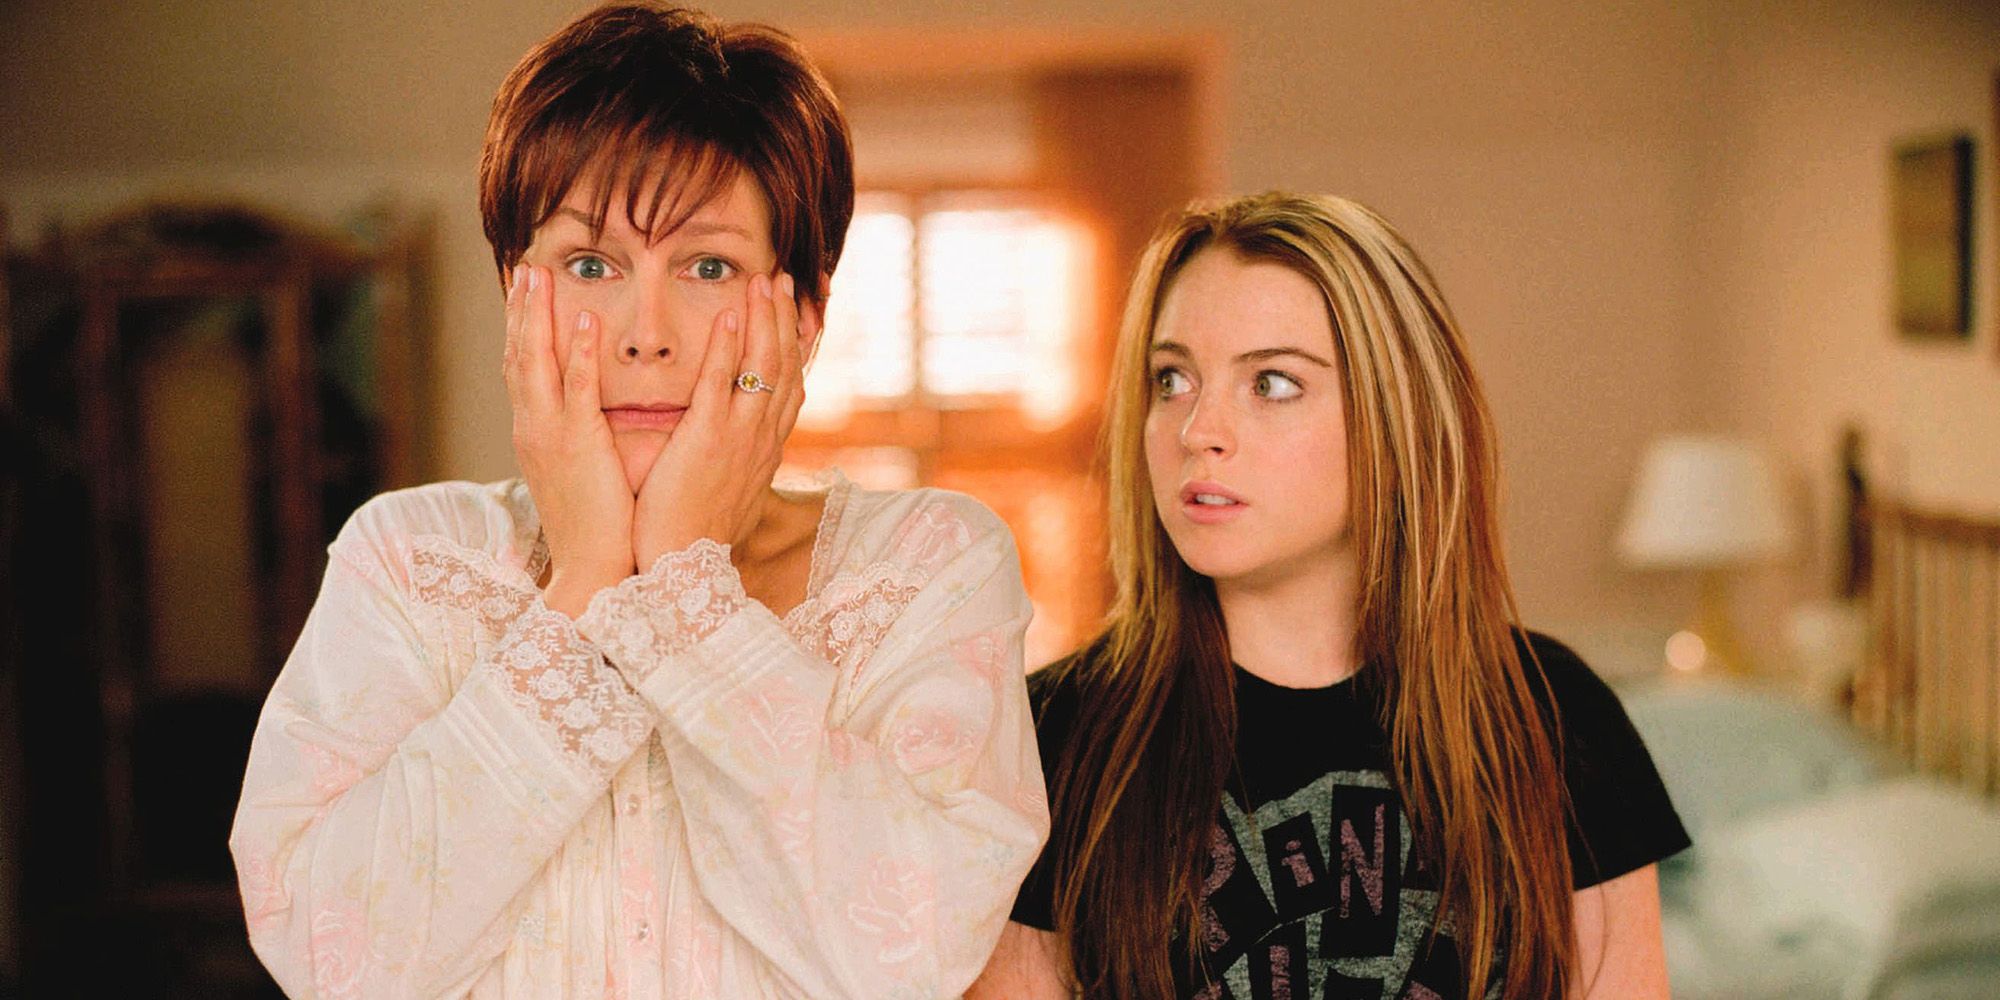 Jamie Lee Curtis holding her face while Lindsay Lohan looks at her in Freaky Friday 